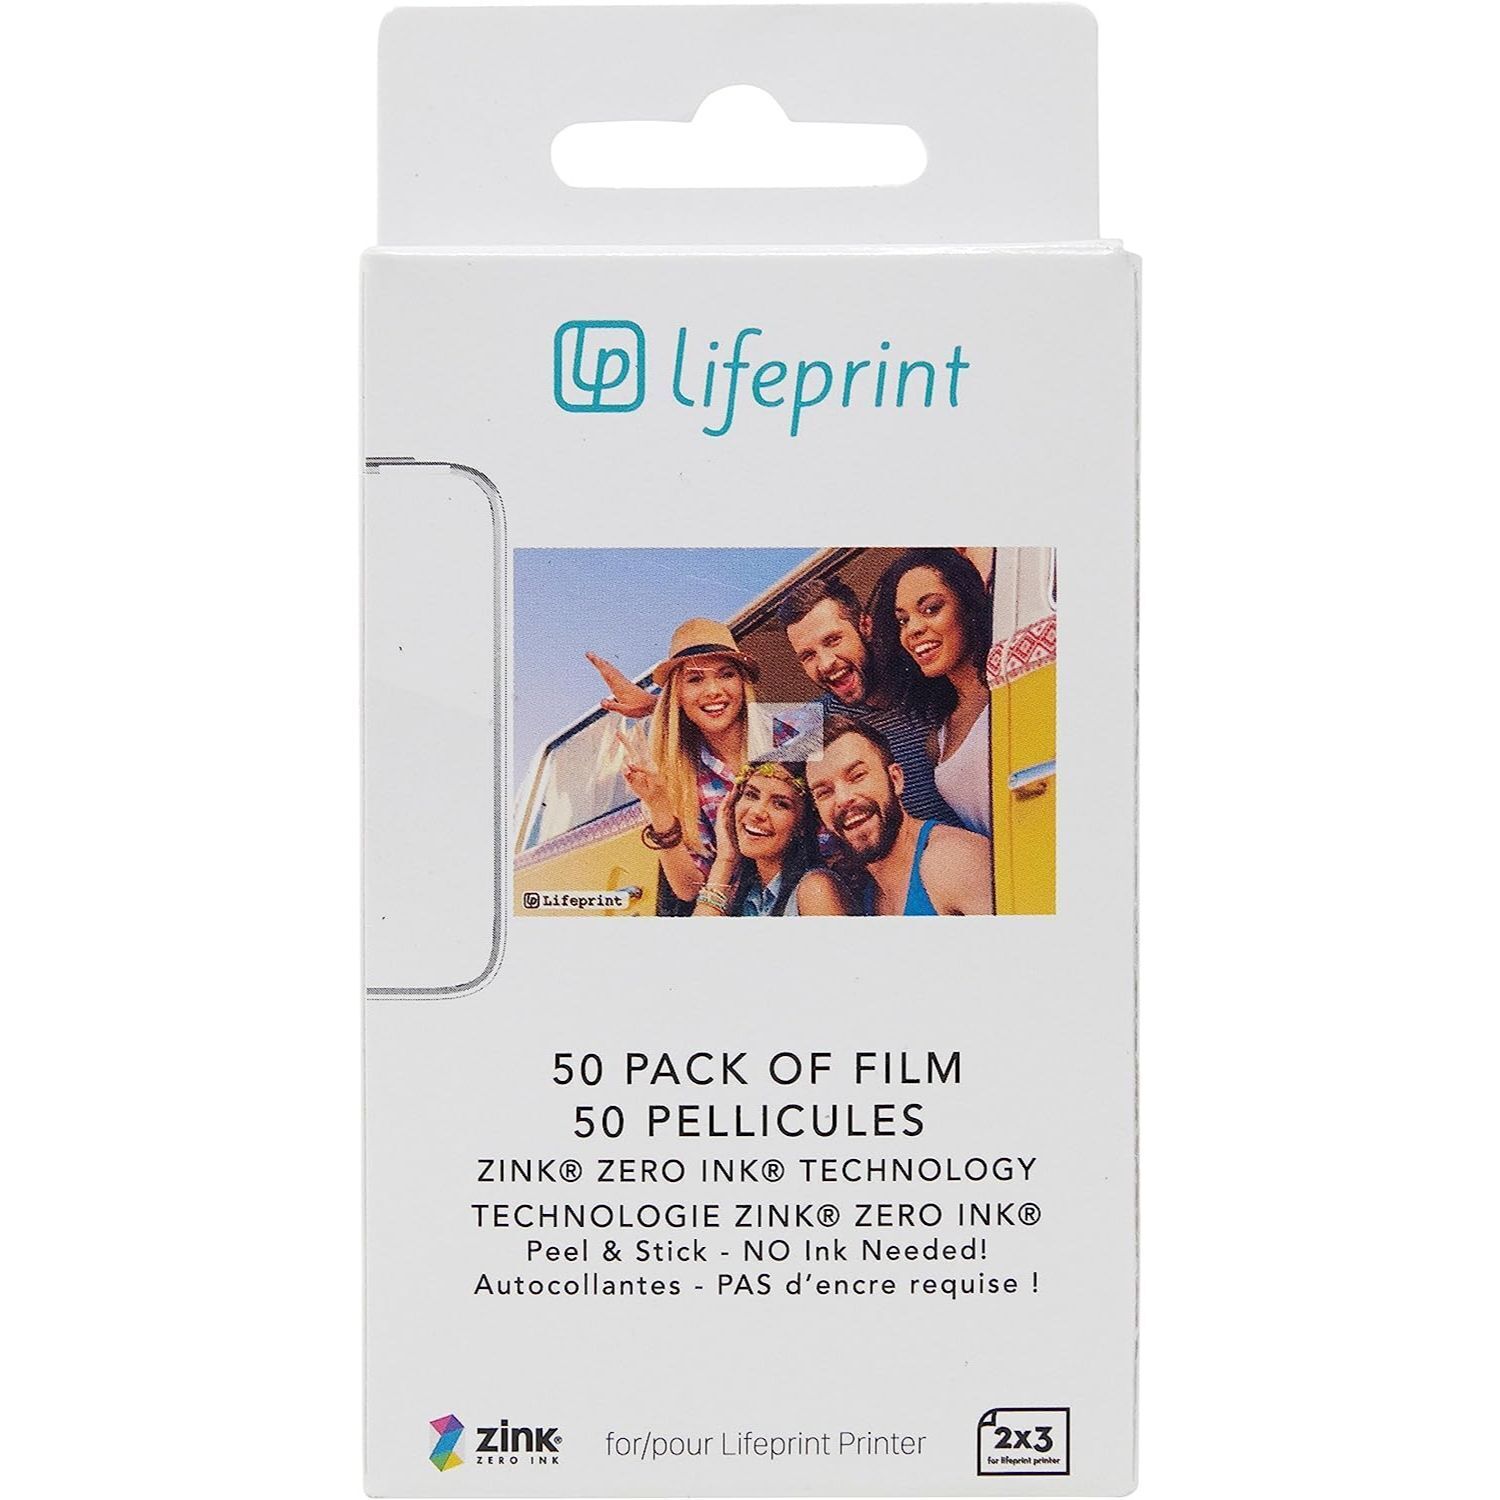 Lifeprint 50 pack of film for Lifeprint Augmented Reality Photo AND Video Printe